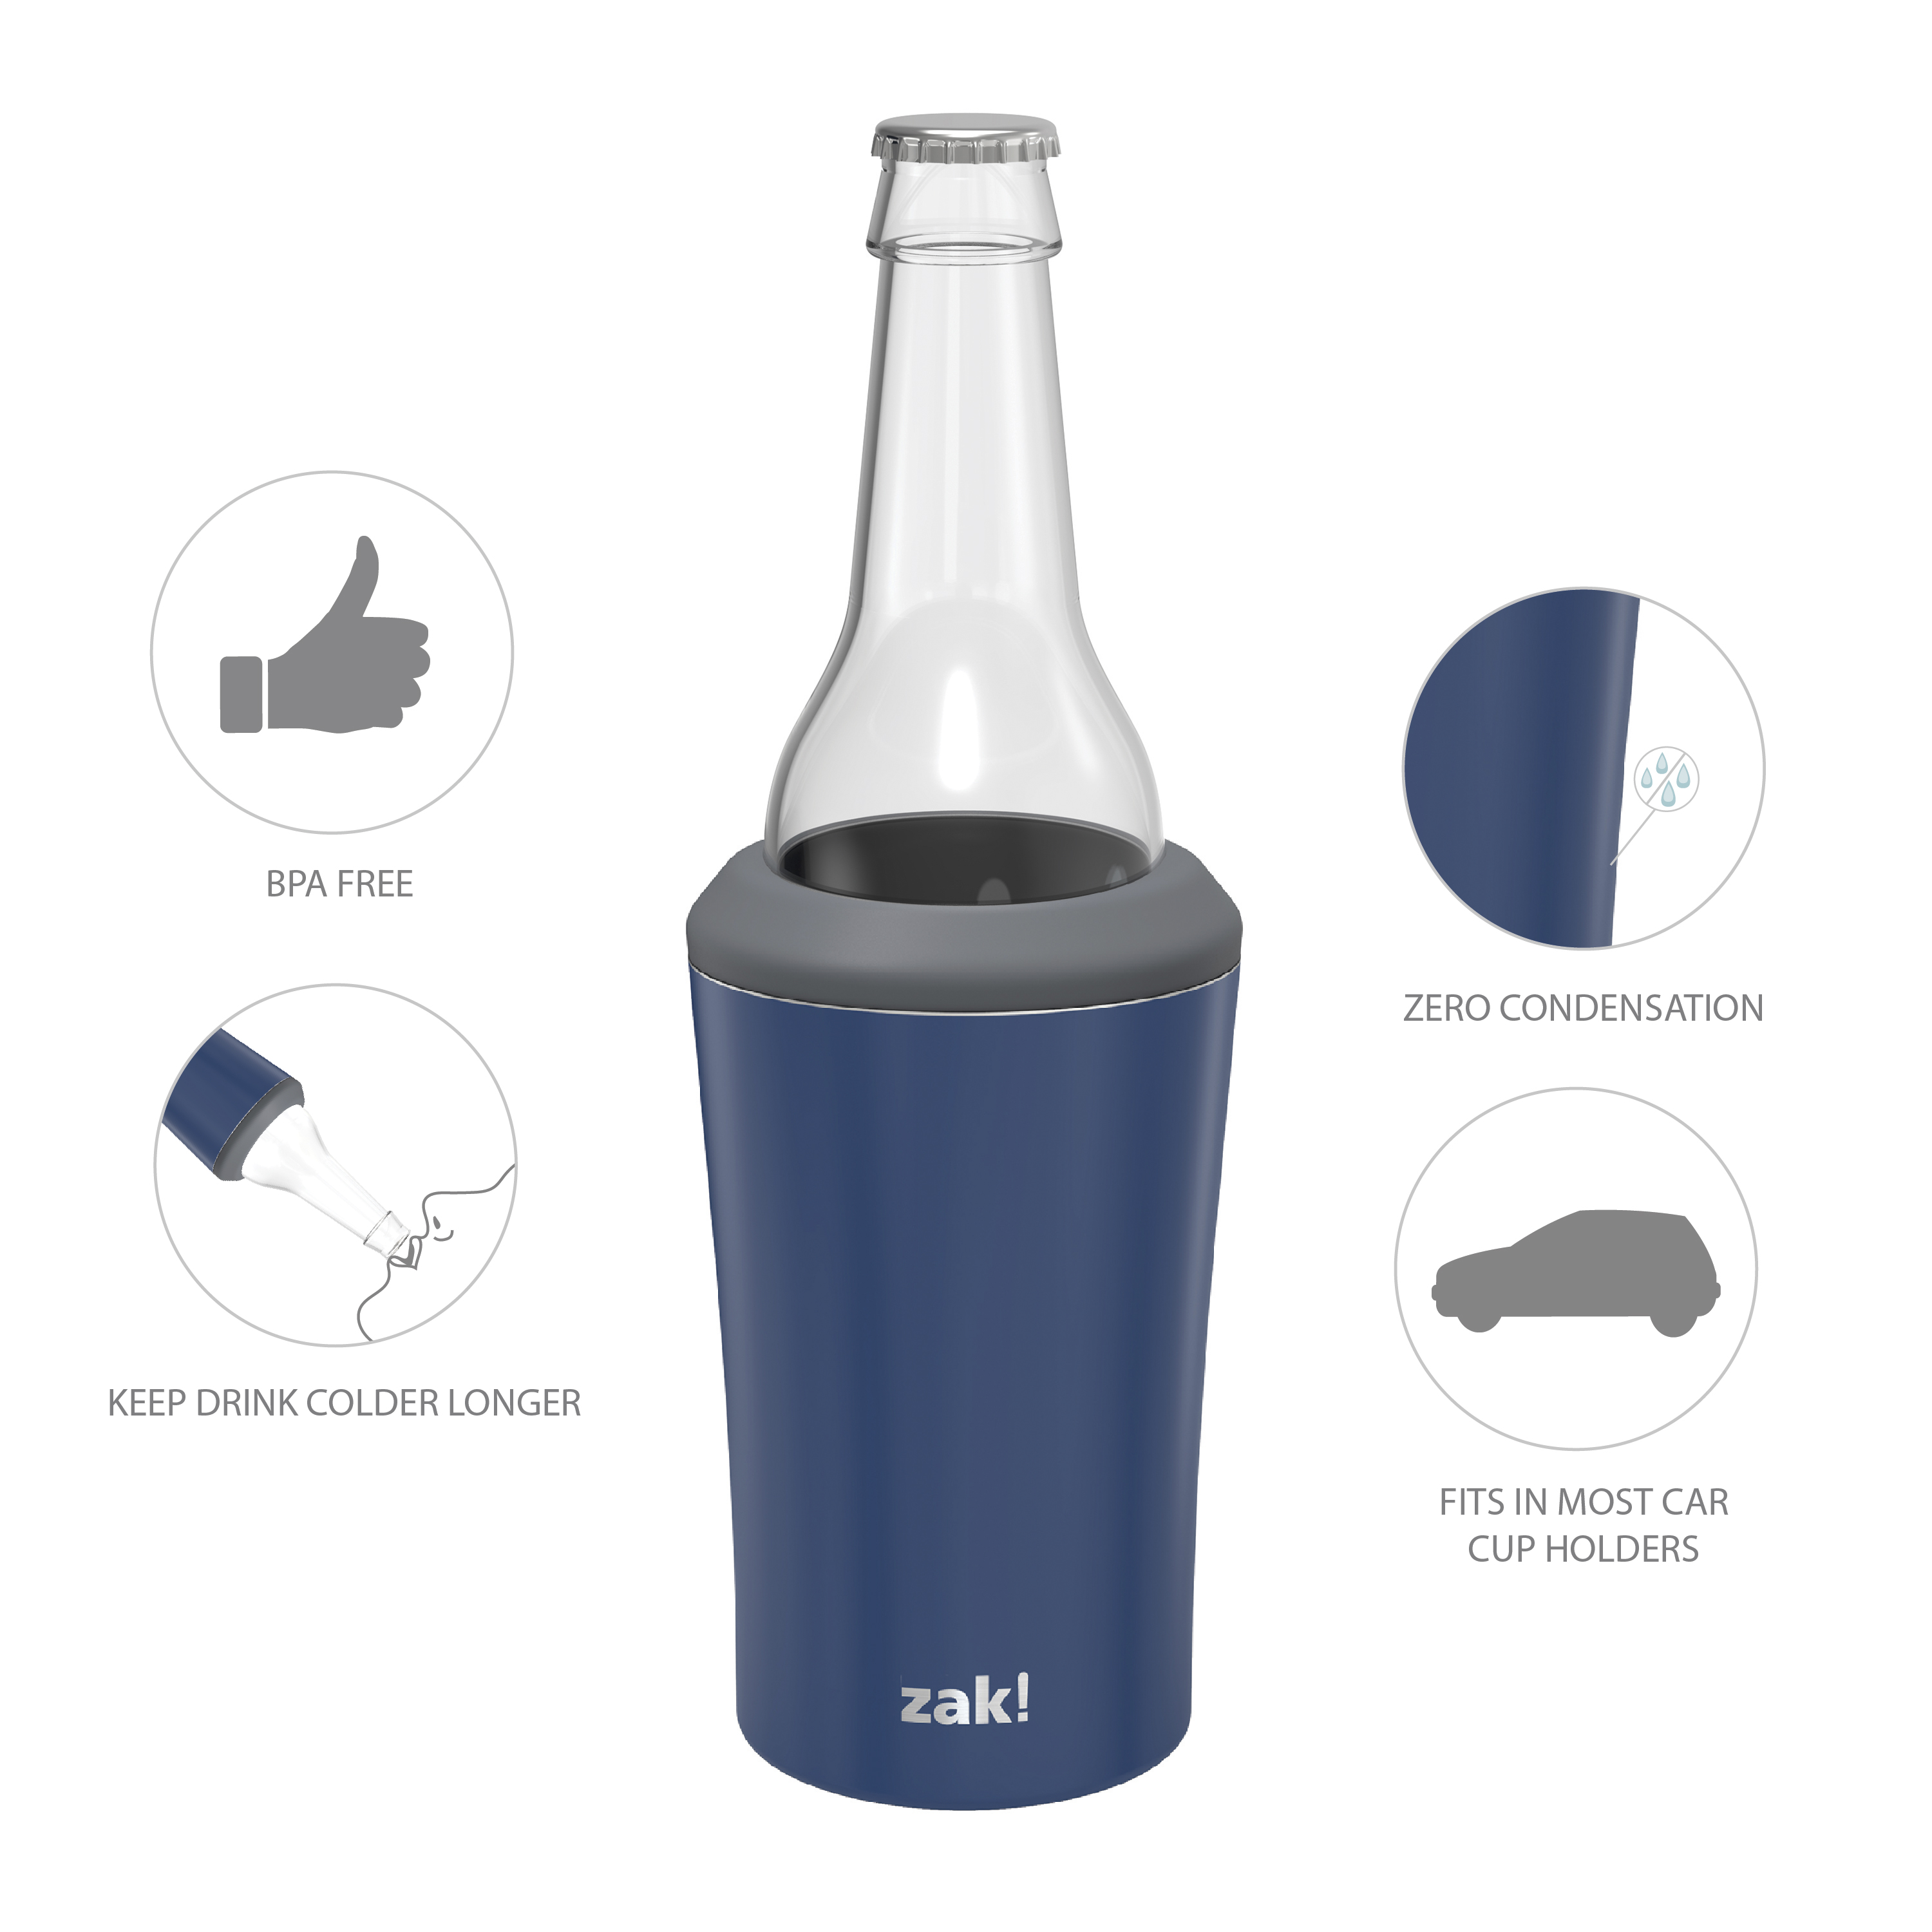 Zak Hydration 12 ounce Double Wall Stainless Steel Can and Bottle Cooler with Vacuum Insulation, Indigo slideshow image 7